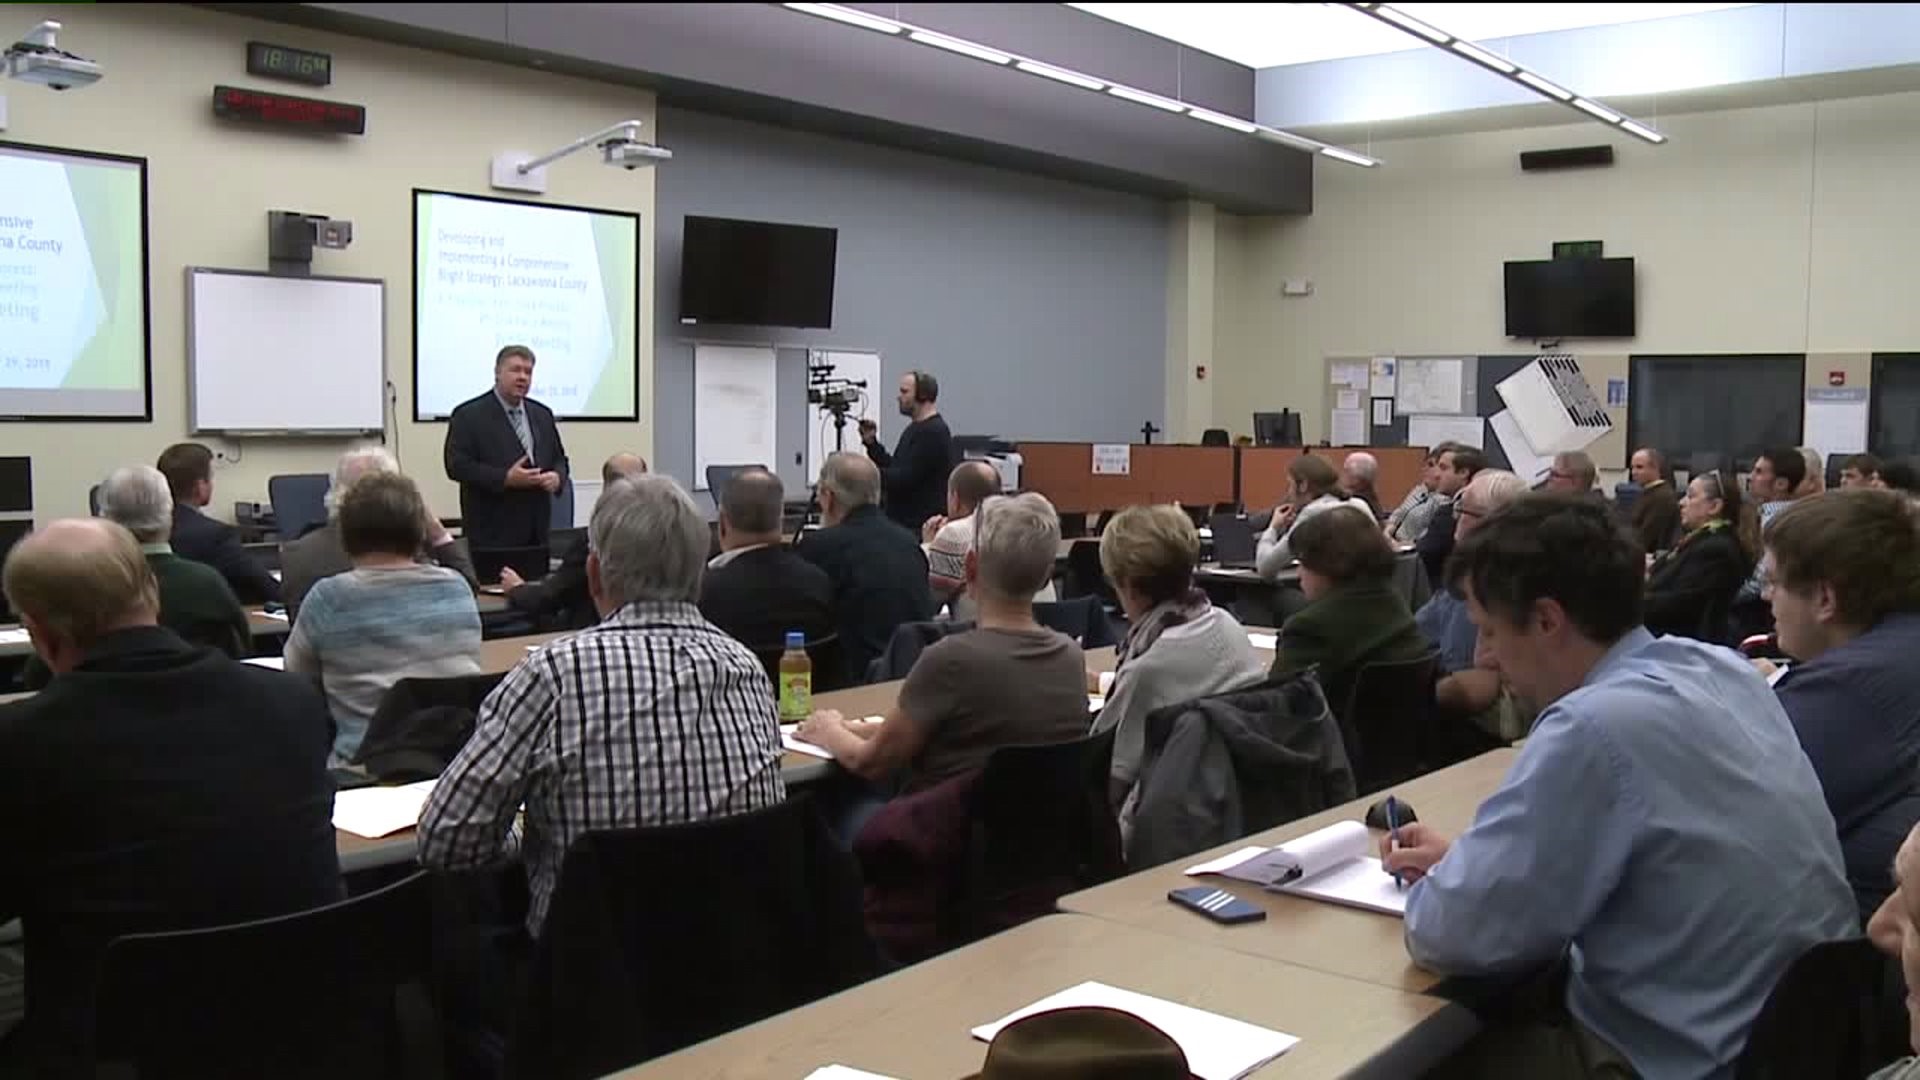 Task Force Gives Presentation on Plan to Fight Blight in Lackawanna County